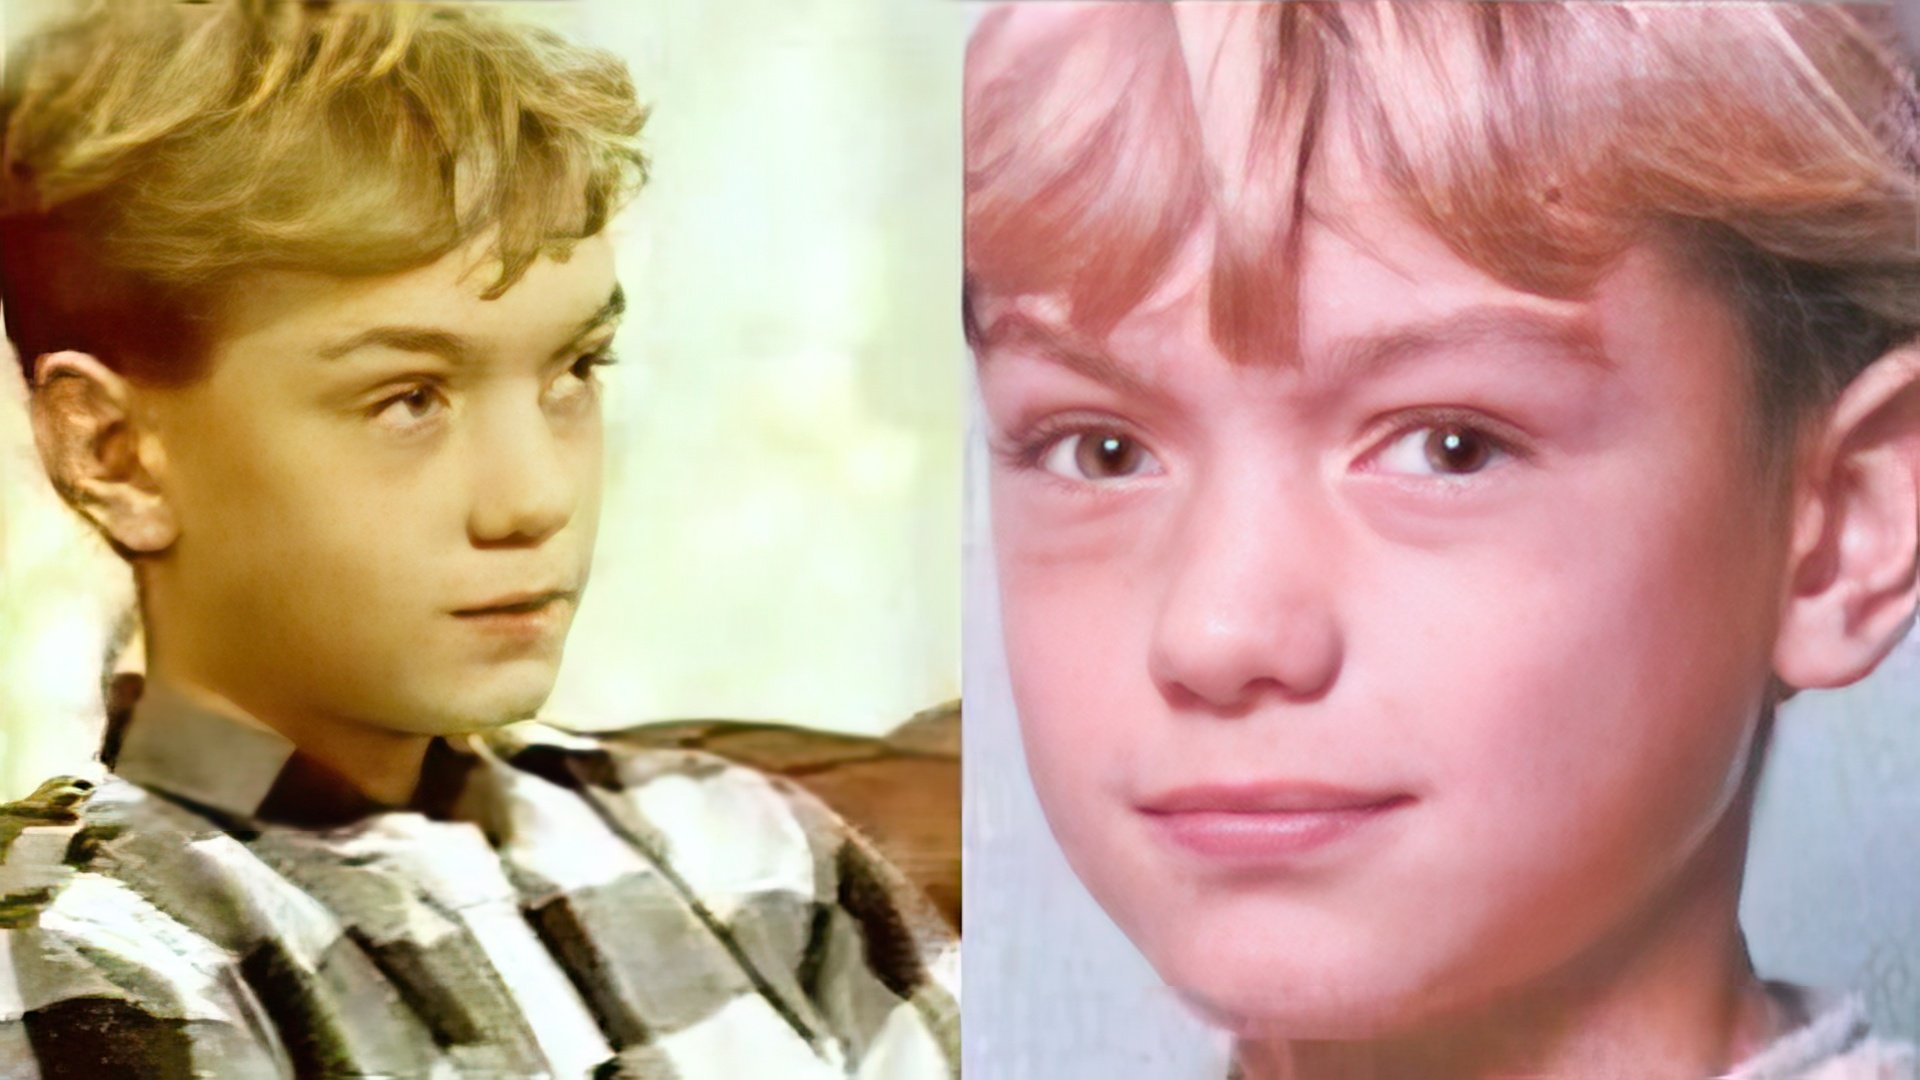 Jude Law’s photos as a child